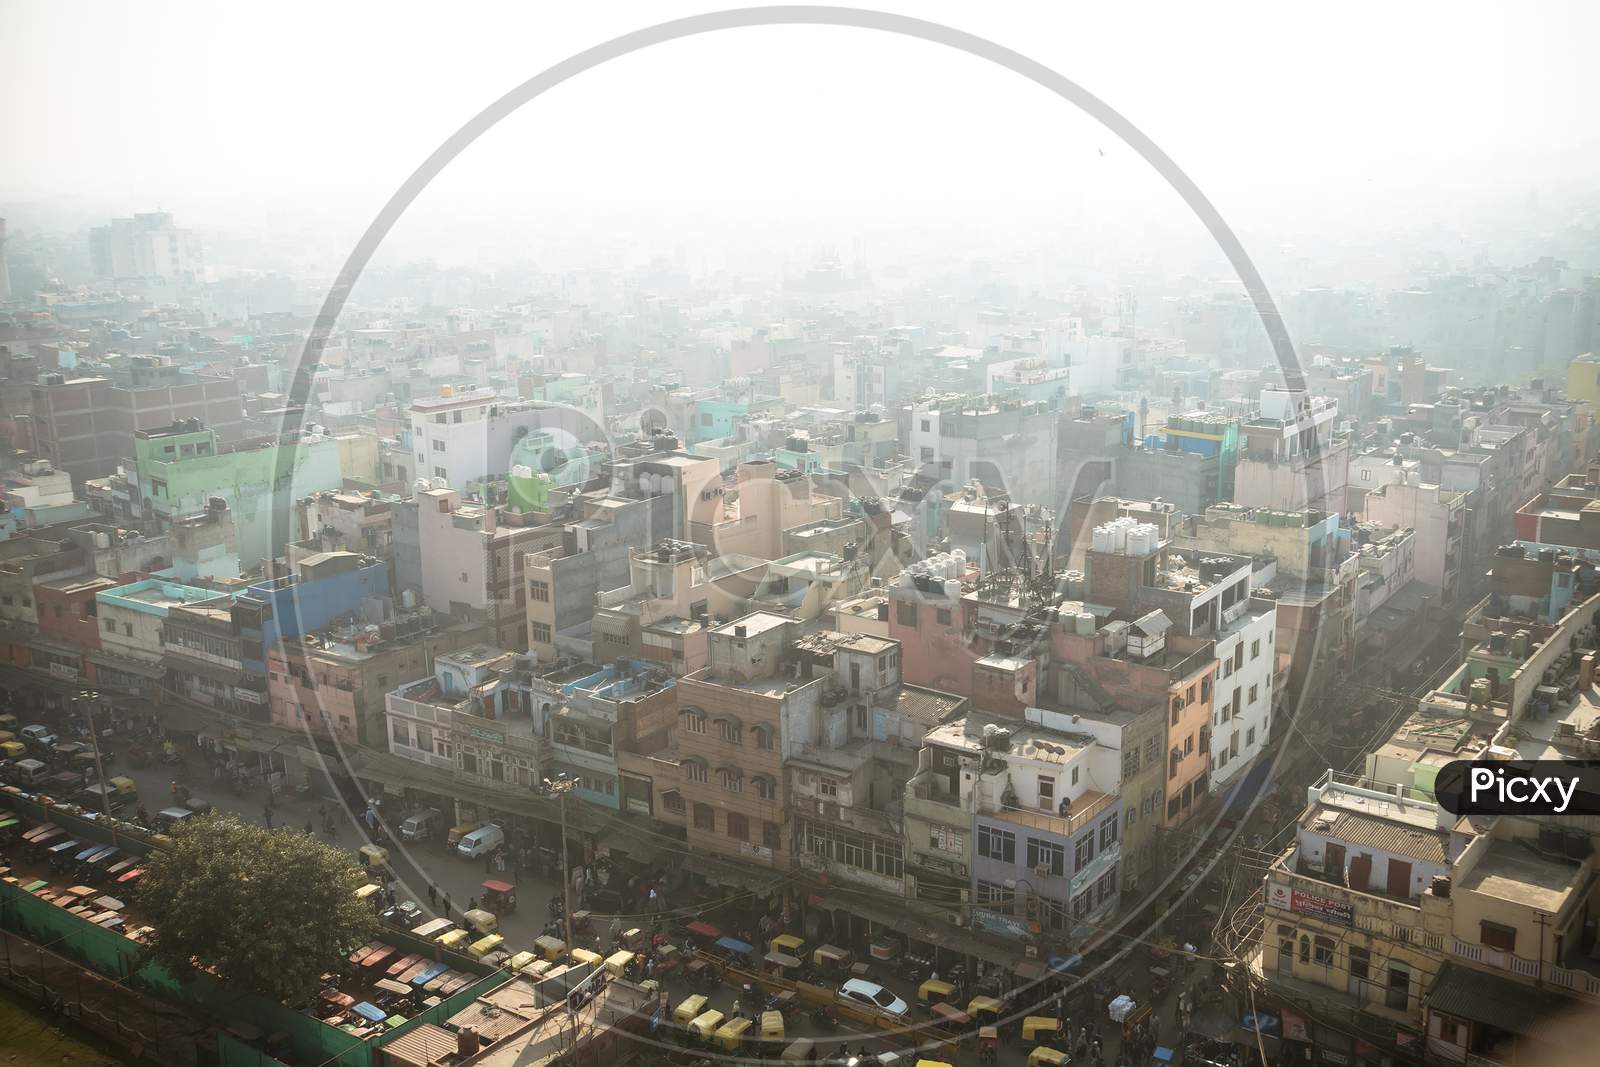 Top View Of The City Street In The Poor Quarter Of New Delhi.